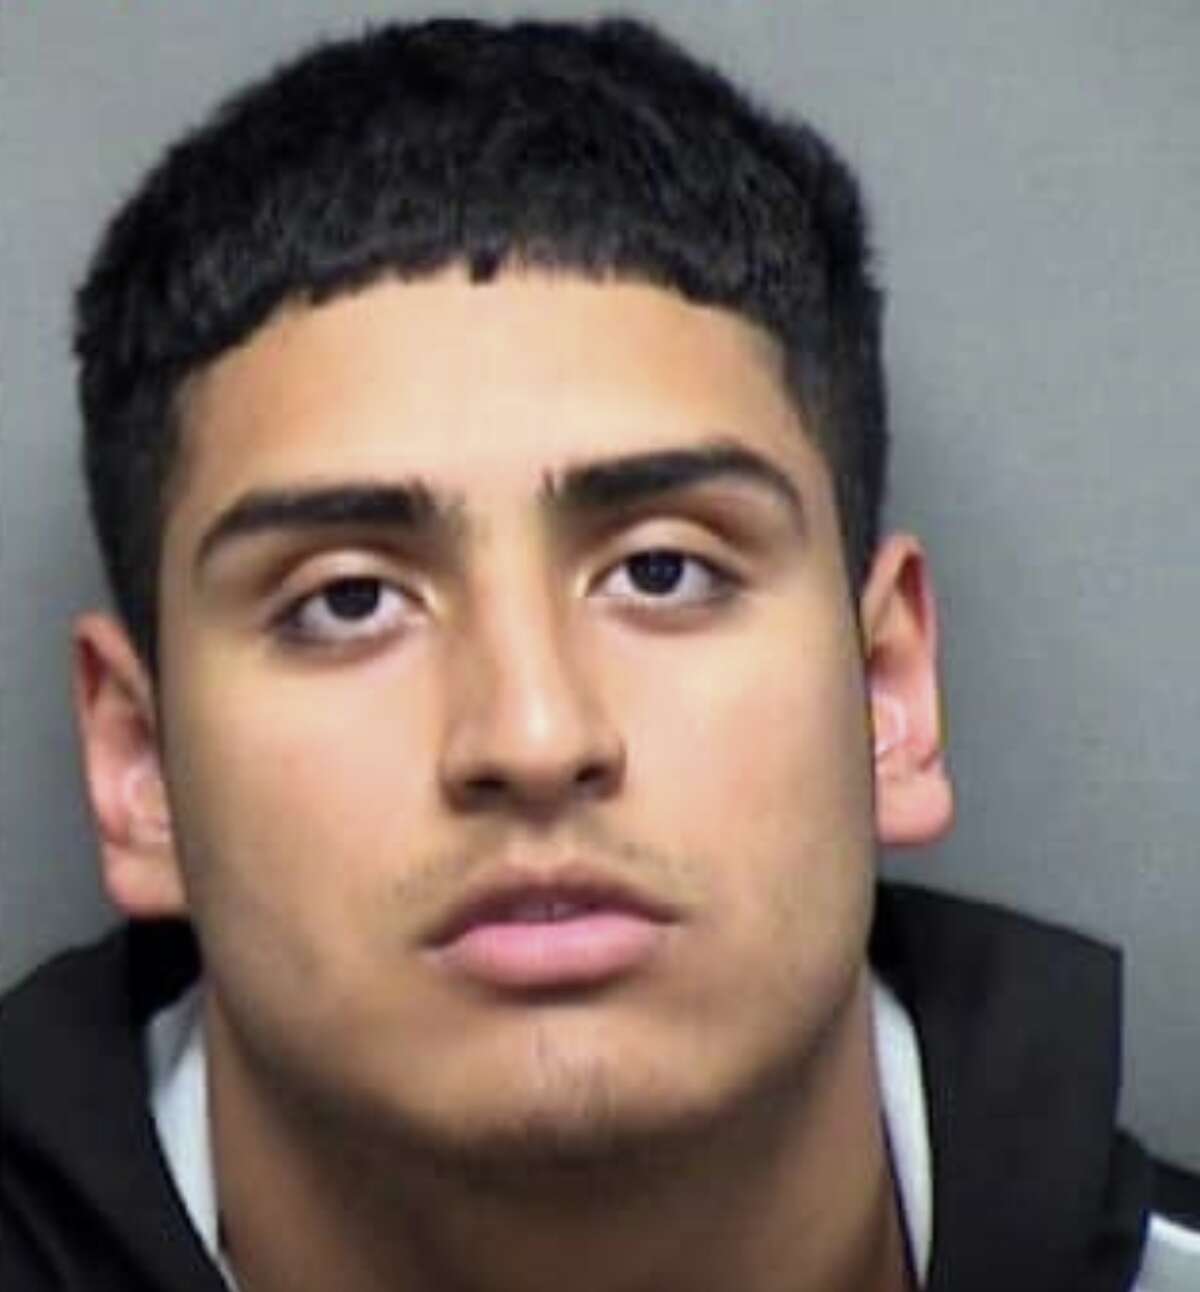 Mason Alvarado, 19, allegedly shot and killed a 20-year-old man outside a home on the 8800 block of Meadow Range St., according to an arrest affidavit.